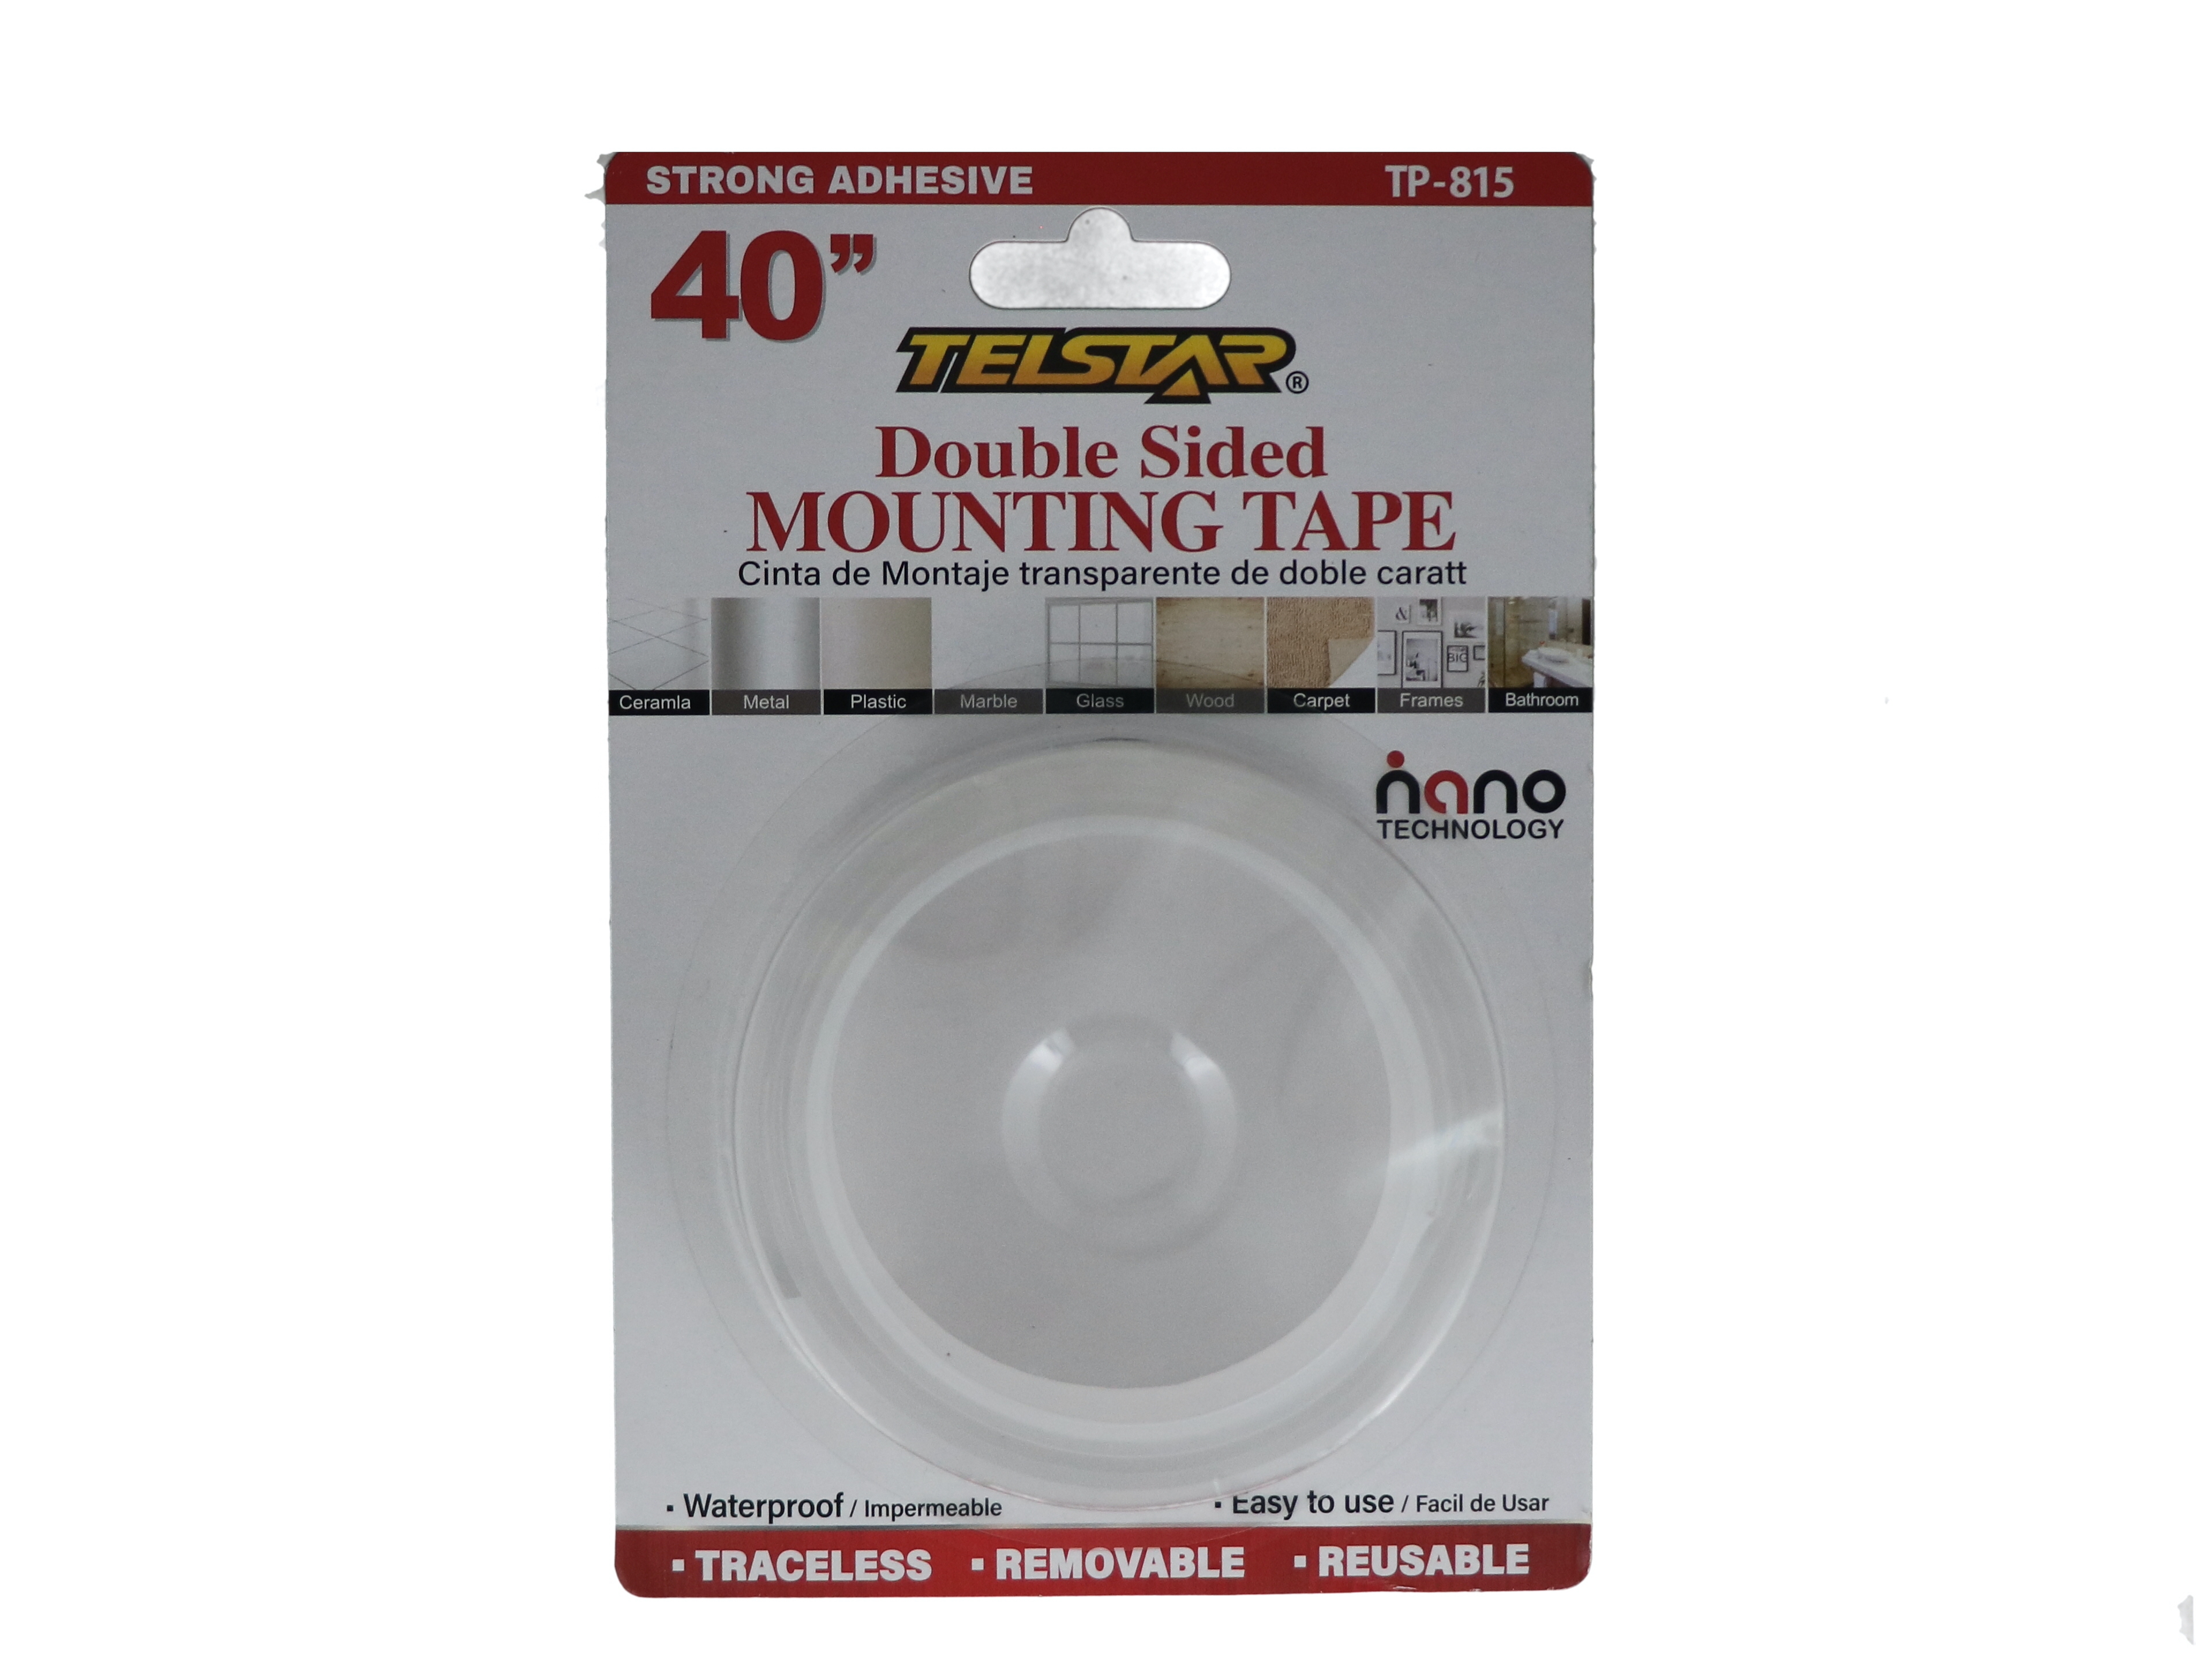 DOUBLE SIDED MOUNTING TAPE